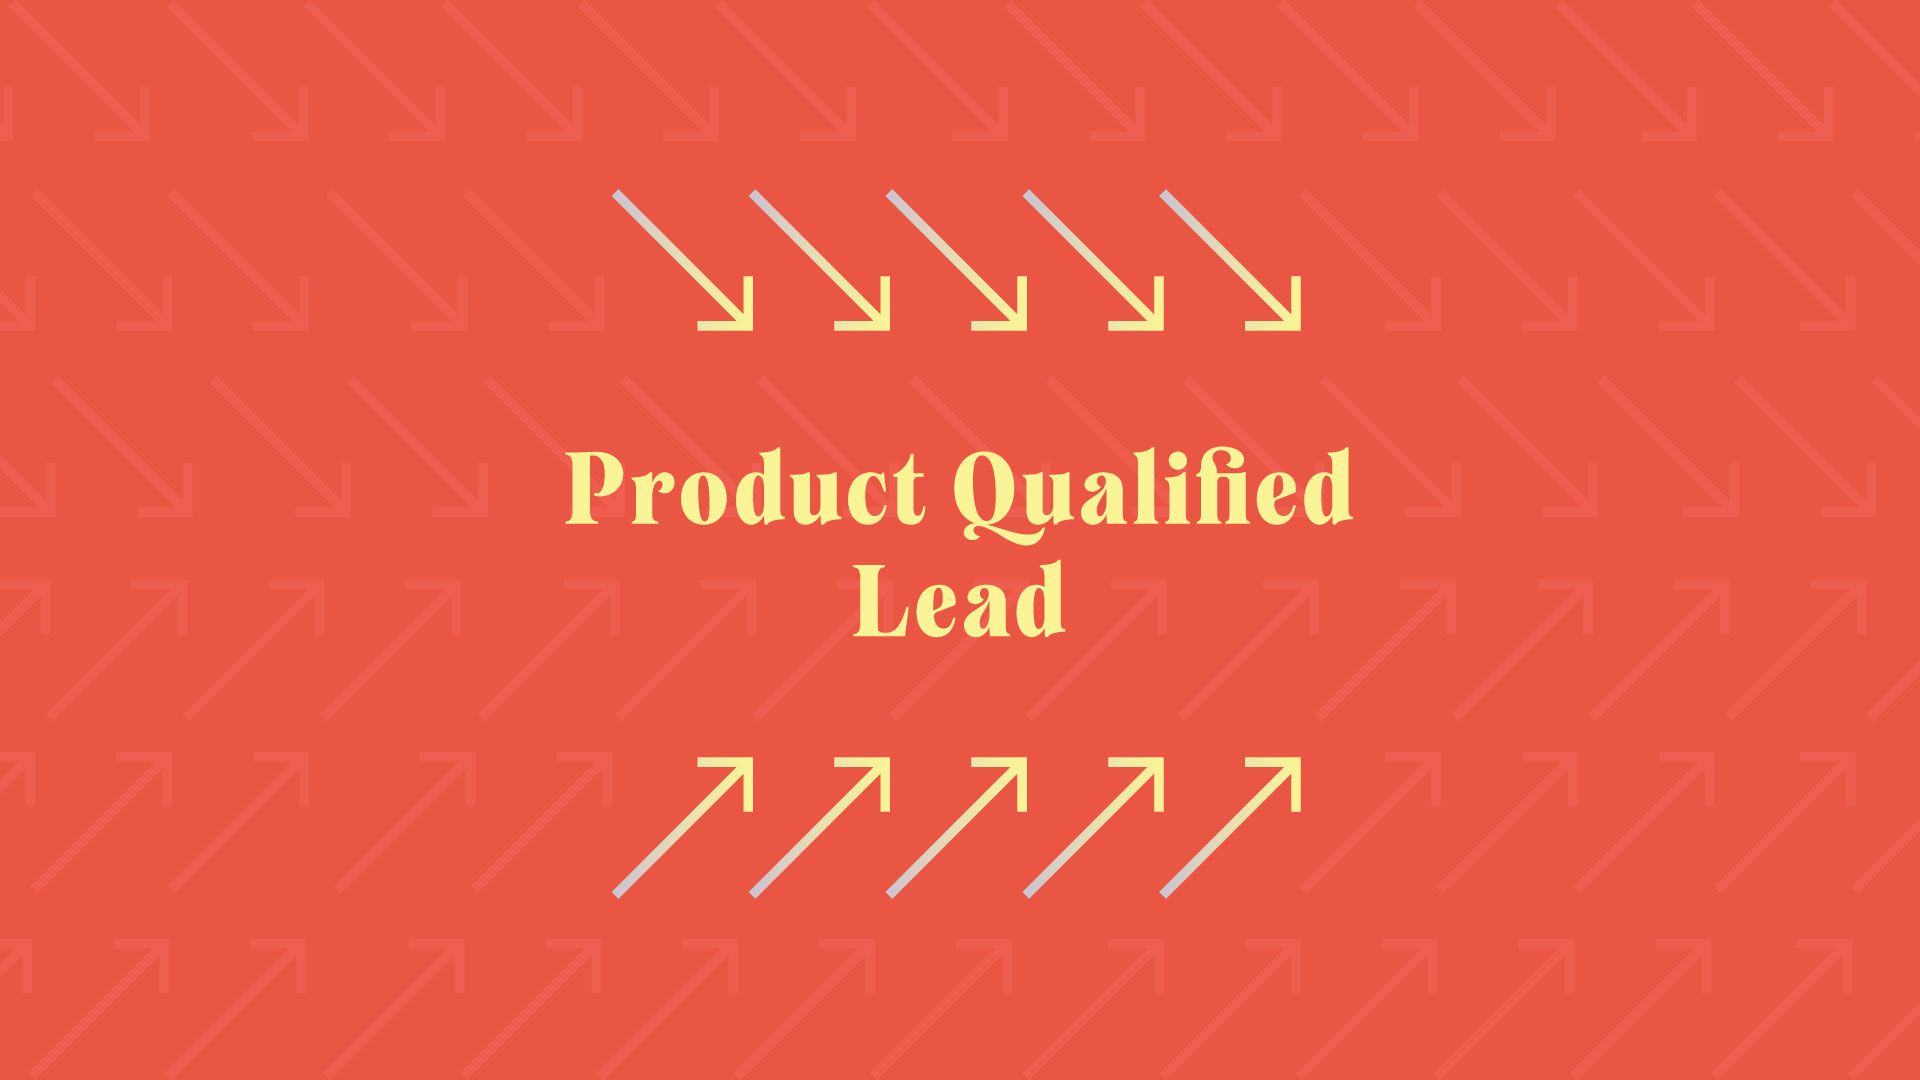 product qualified lead red cover image with yellow arrows